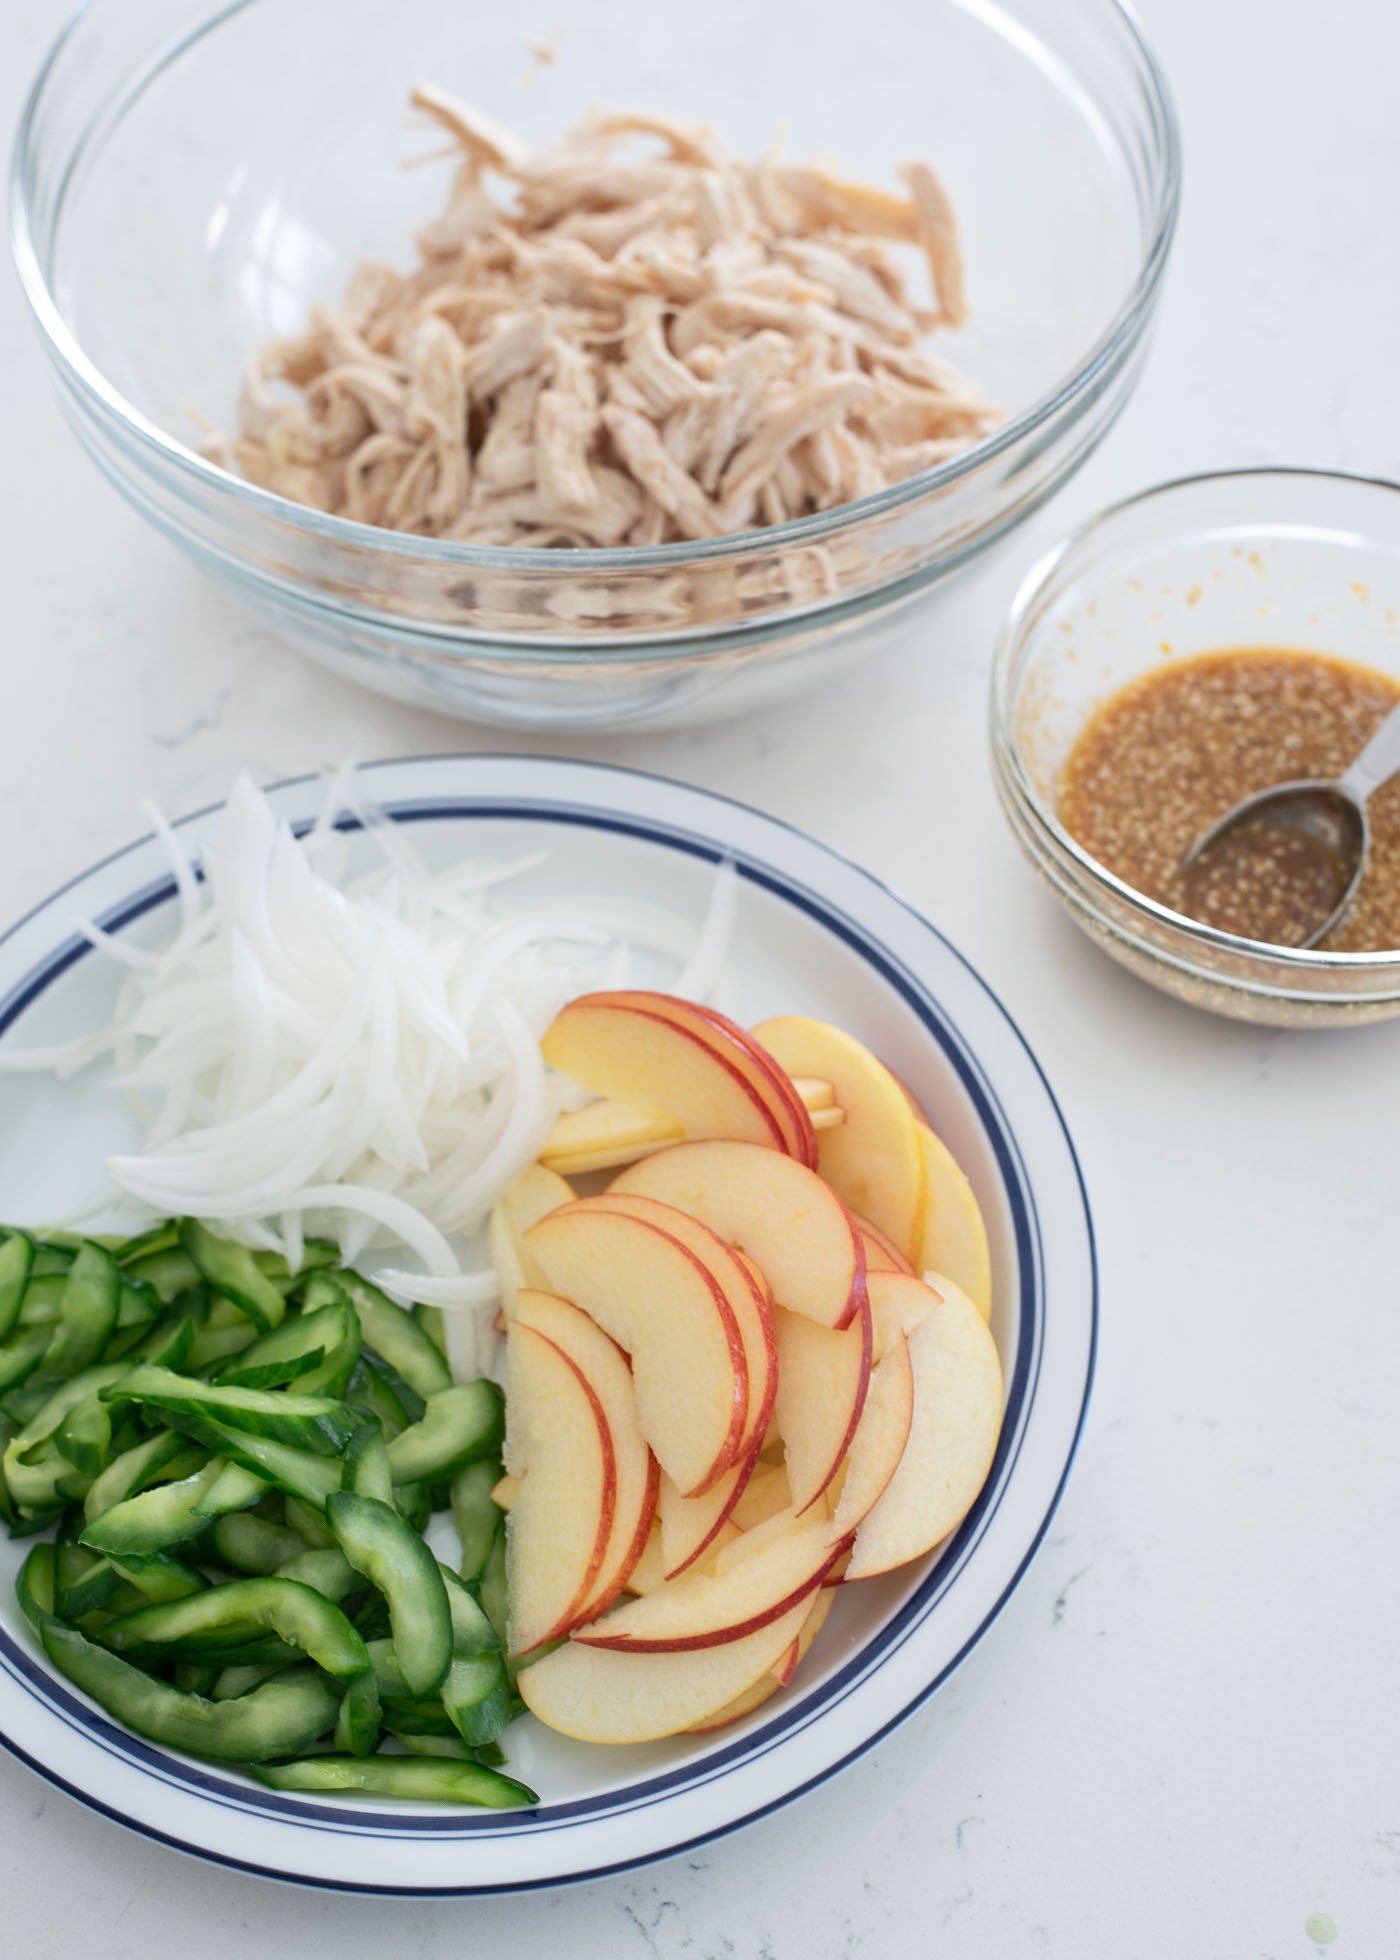 Ingredients for Korean chicken salad and the dressing are gathered up.